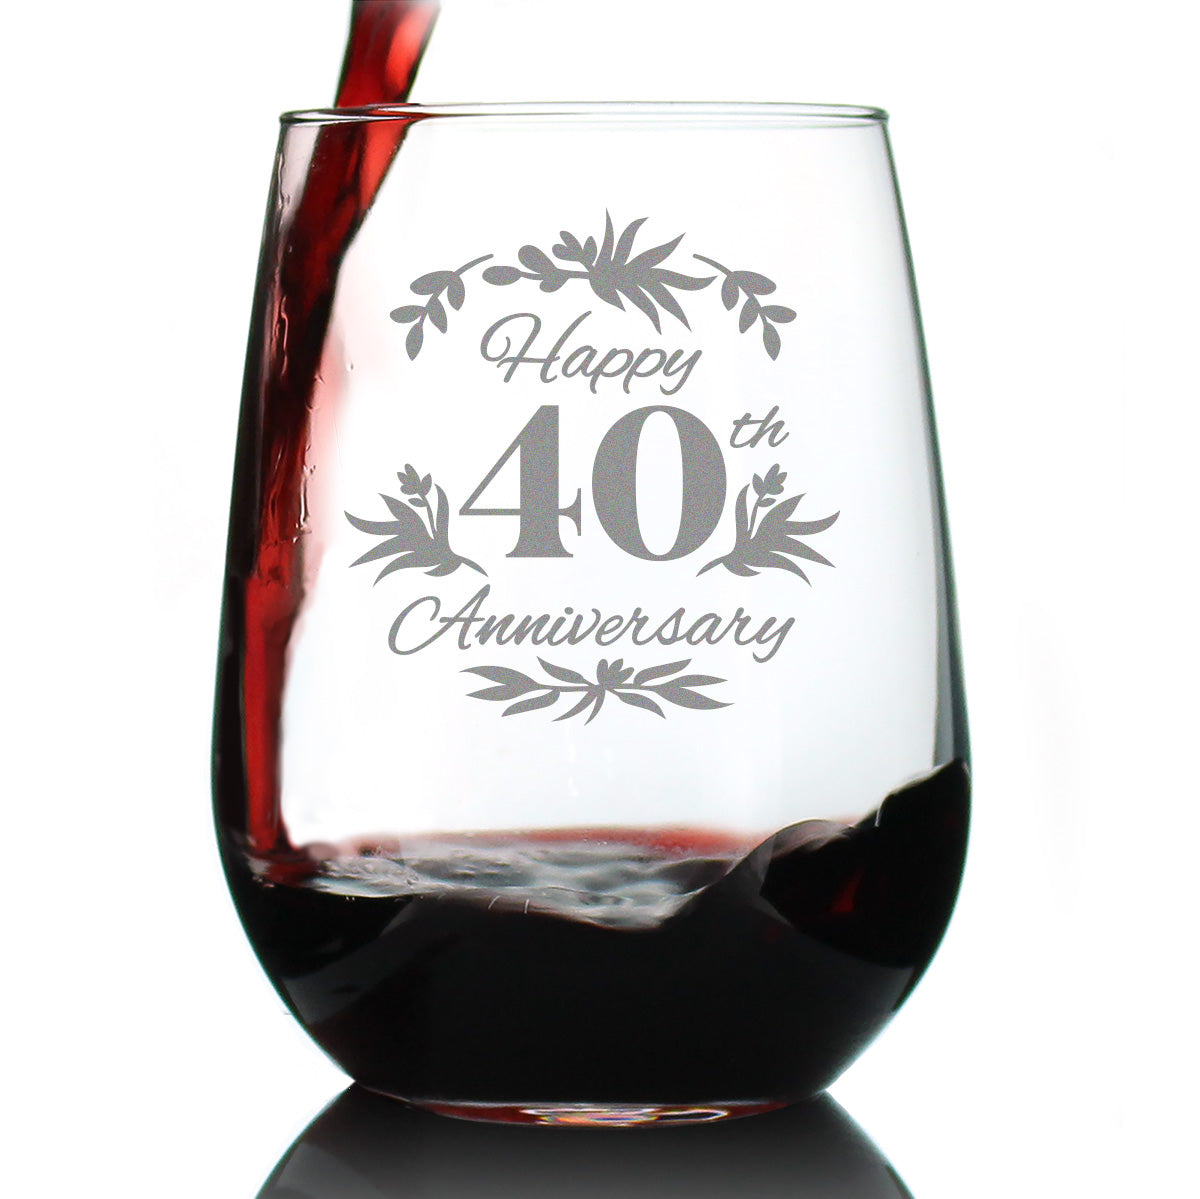 Happy 40th Anniversary - Stemless Wine Glass Gifts for Women &amp; Men - 40 Year Anniversary Party Decor - Large Glasses